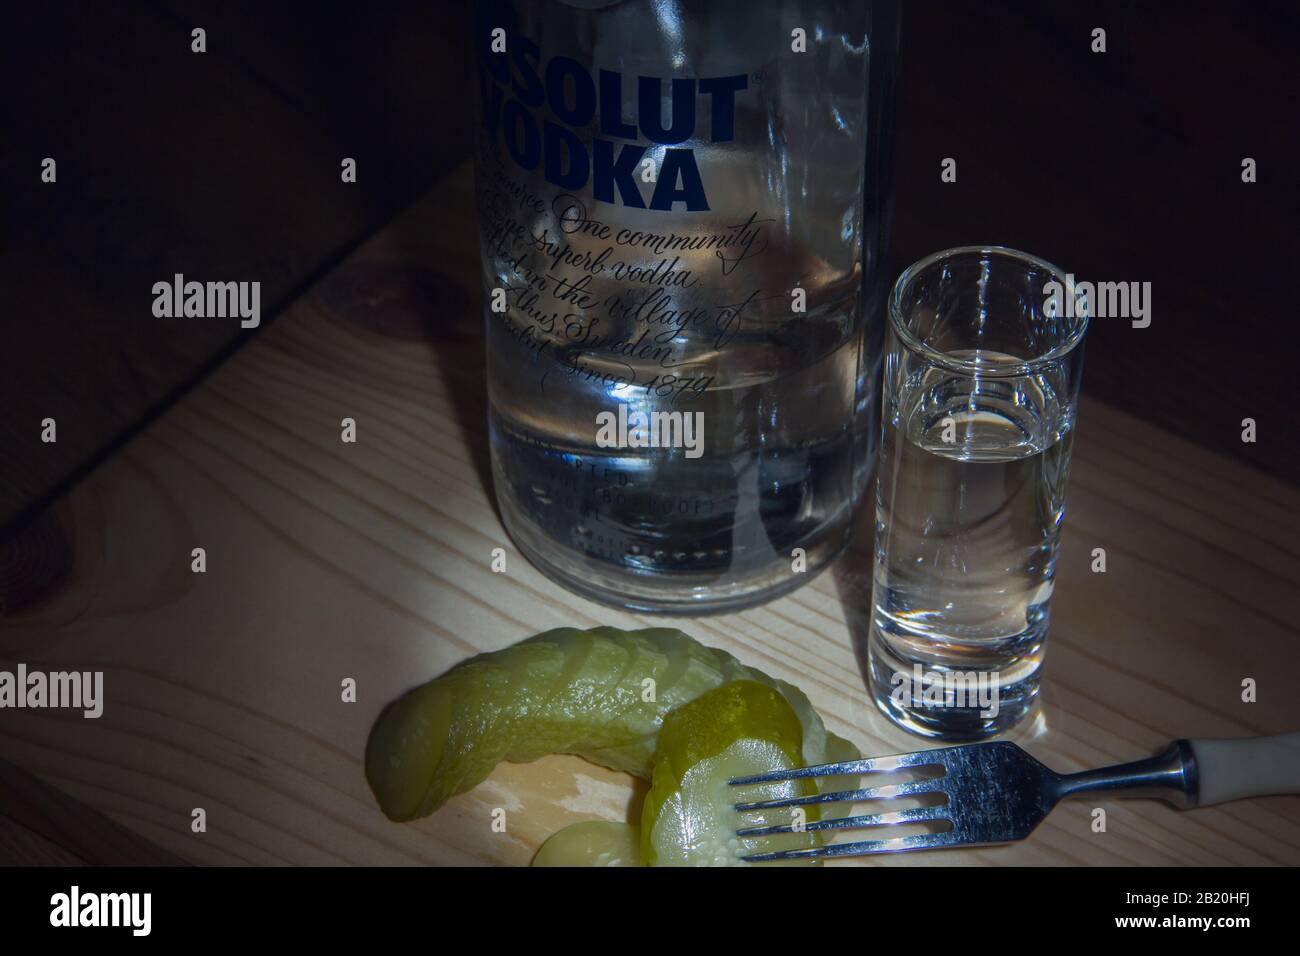 Izhevsk, Russia January 6, 2020: Bottle of Absolut vodka, a glass and a pickle appetizer Stock Photo